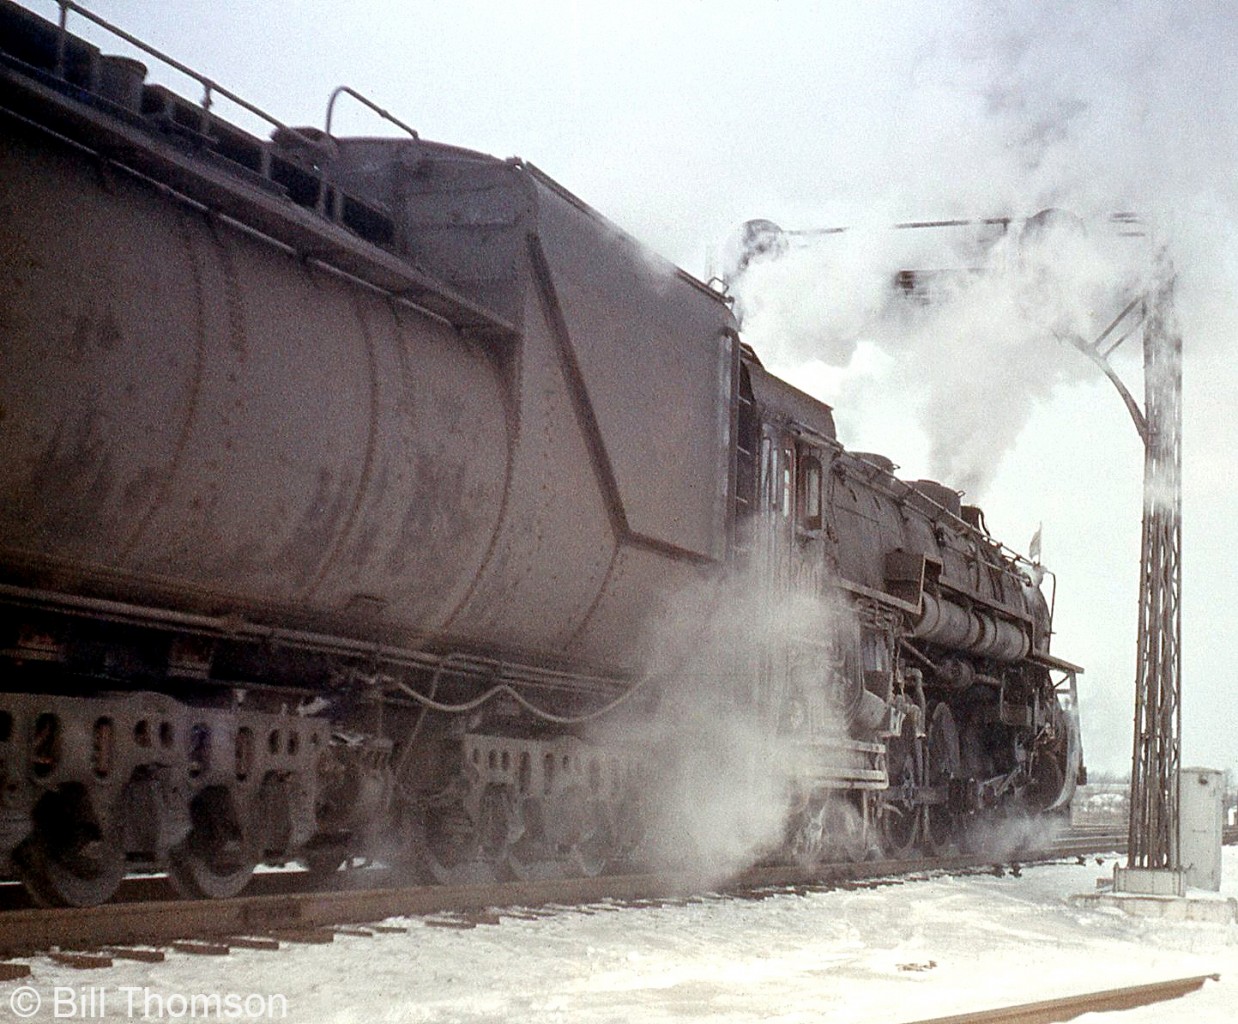 CN 4-8-4 Northern 6300 steams past the signals eastbound at Port Credit, on a snowy day in 1954. 6300, based out of Mimico Roundhouse, was the class unit of the U3a group of former GTW 6300-6311 Northerns that were transferred north of the border.

More CNR/GTW 6300's:
Front view of 6300: http://www.railpictures.ca/?attachment_id=28667
6301 passing by Clarkson Station: http://www.railpictures.ca/?attachment_id=13305
6301 at Mimico Roundhouse: http://www.railpictures.ca/?attachment_id=26621